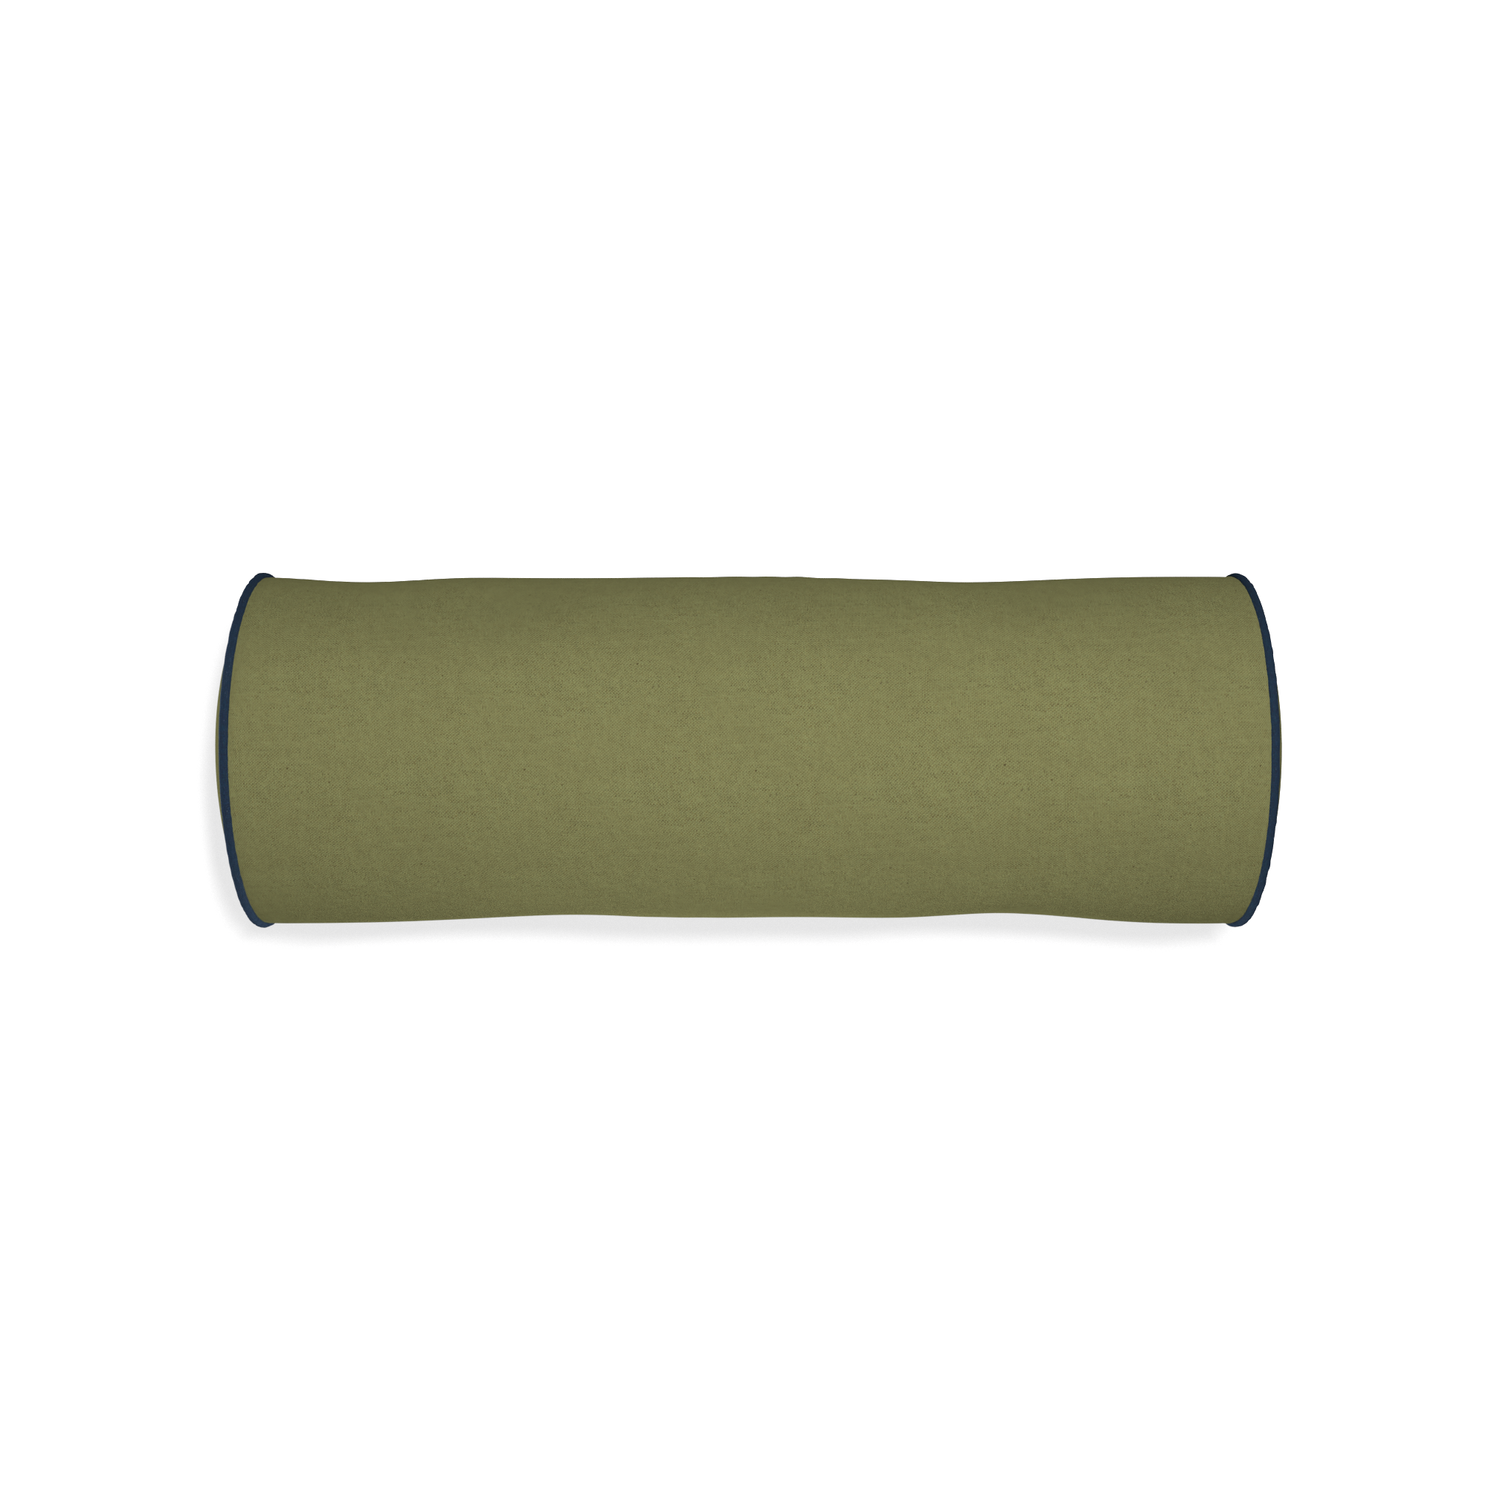 Bolster moss custom moss greenpillow with c piping on white background